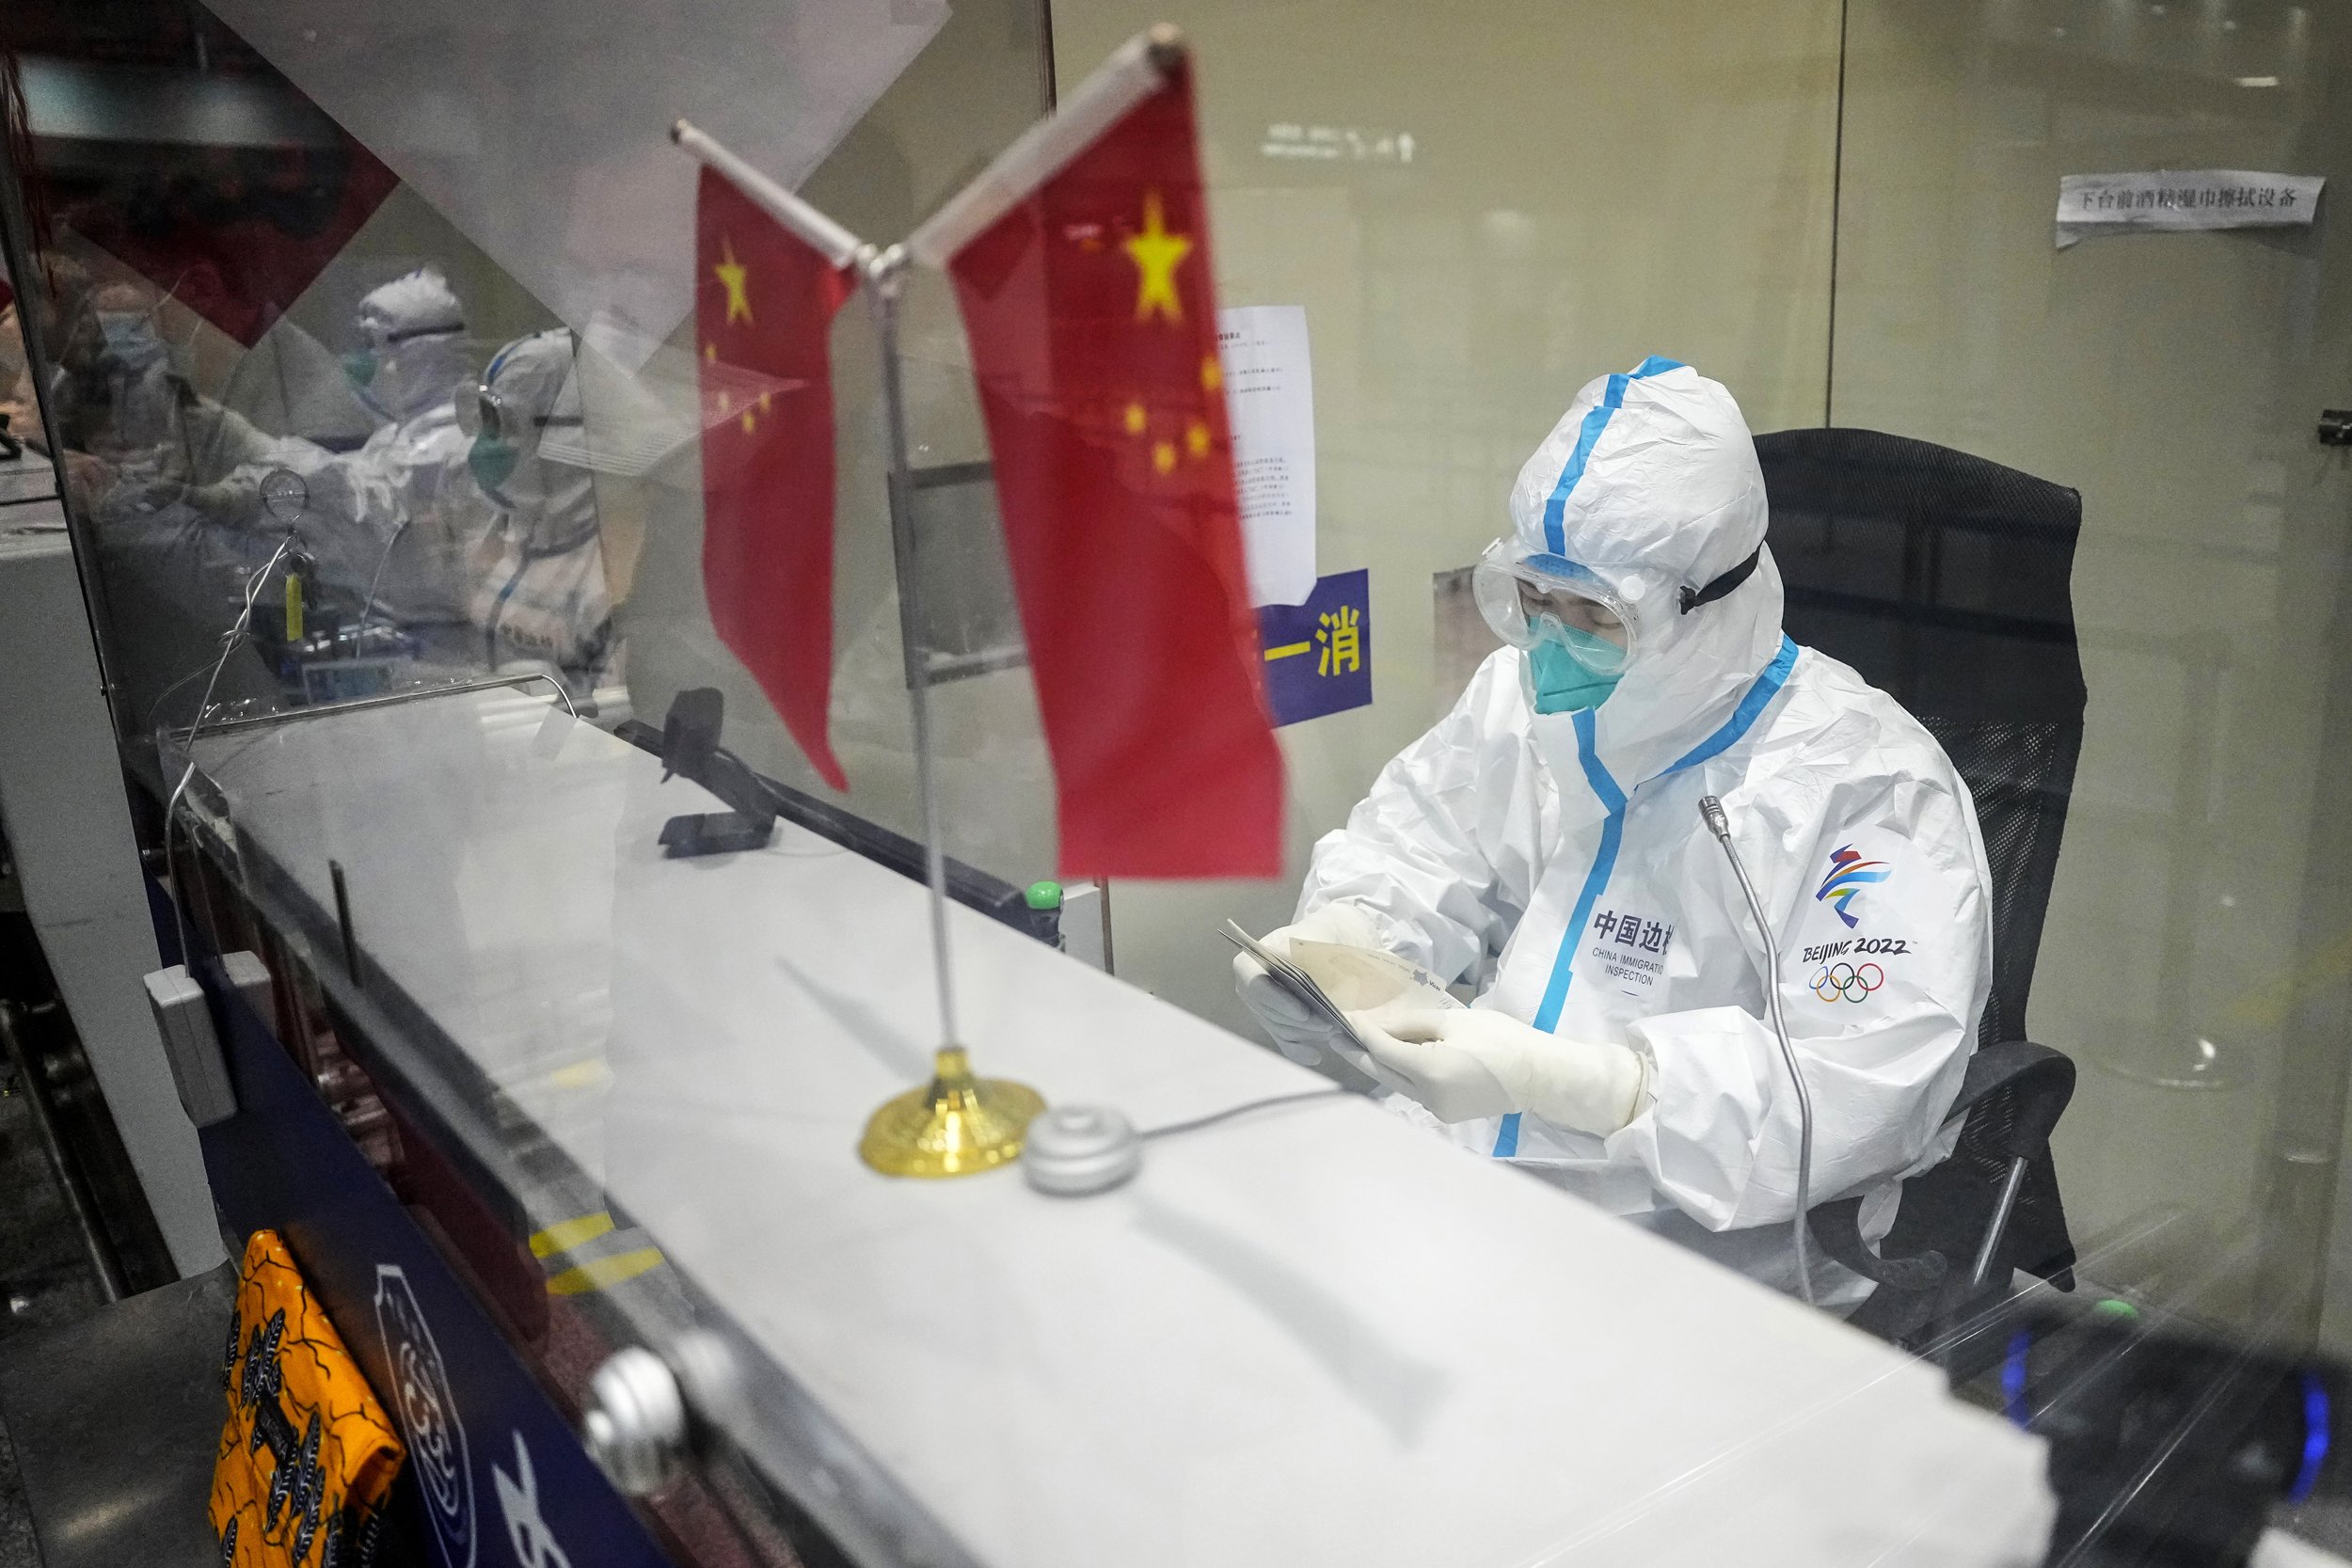  An immigration officer checks documents at the Beijing Capital International Airport ahead of the 2022 Winter Olympics, Tuesday, Feb. 1, 2022, in Beijing. (AP Photo/Pavel Golovkin) 